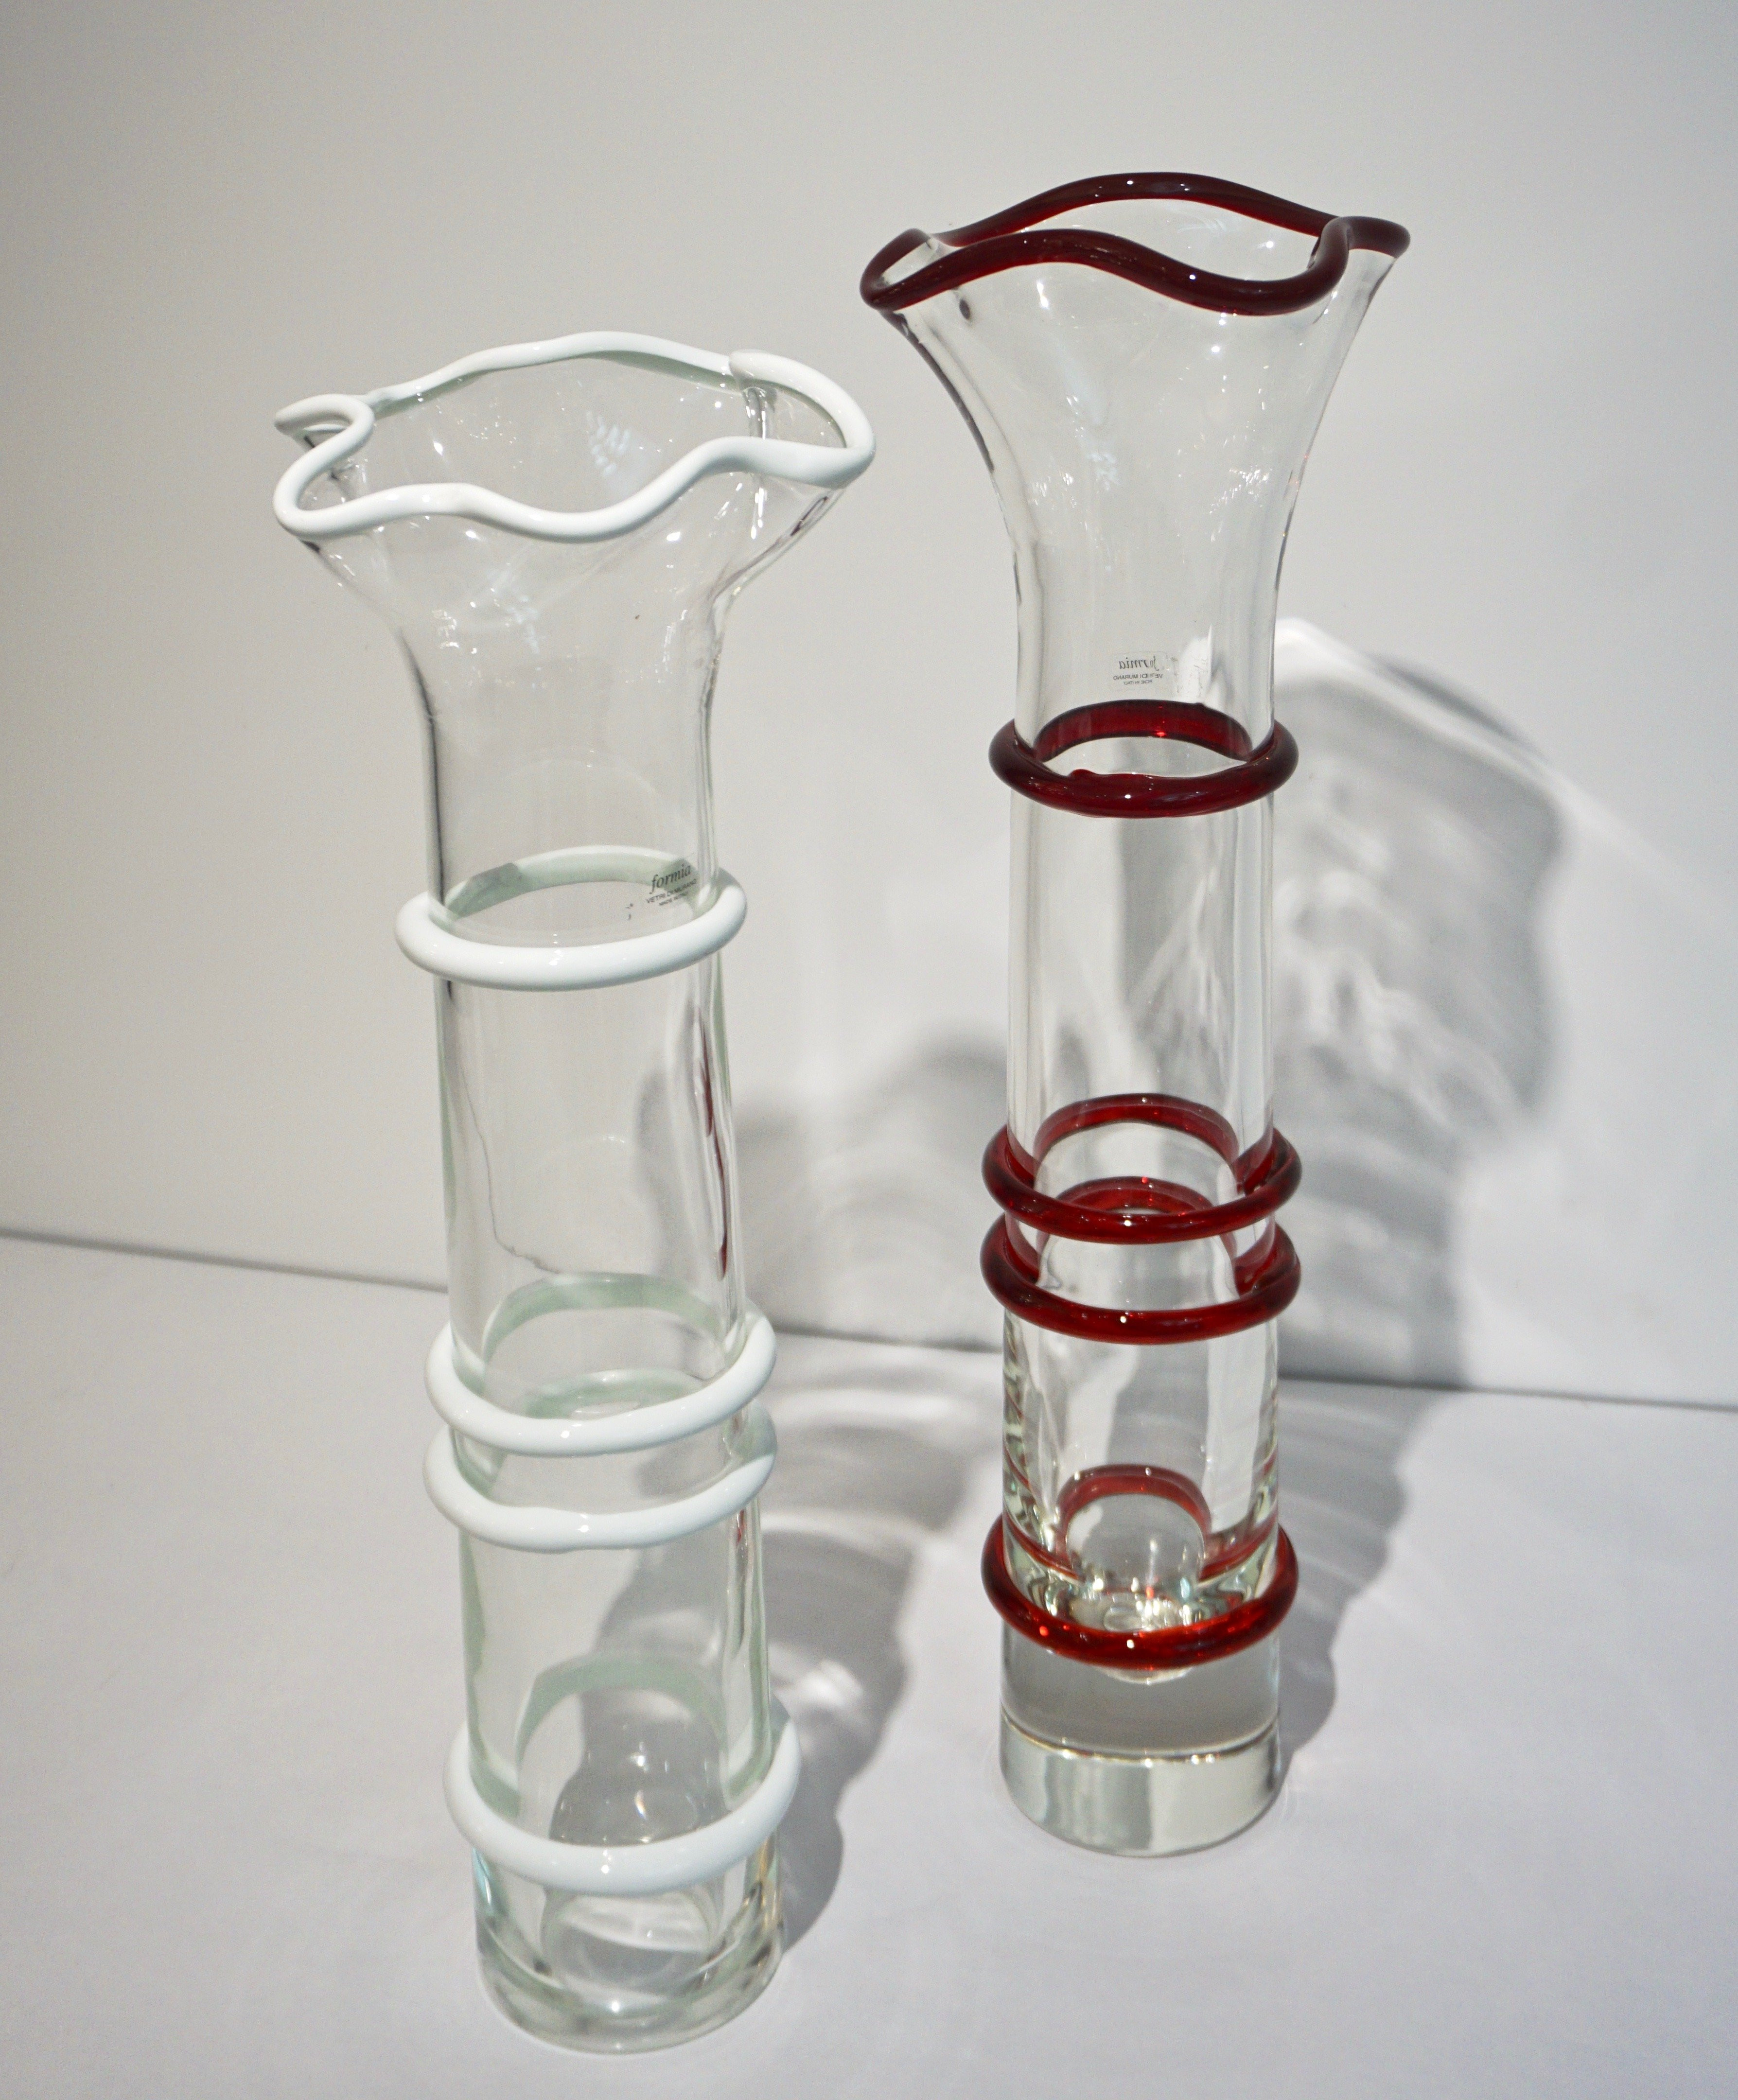 baccarat crystal vase prices of formia italian 1970s two white red crystal clear murano glass tall within formia italian 1970s two white red crystal clear murano glass tall flared vases for sale at 1stdibs